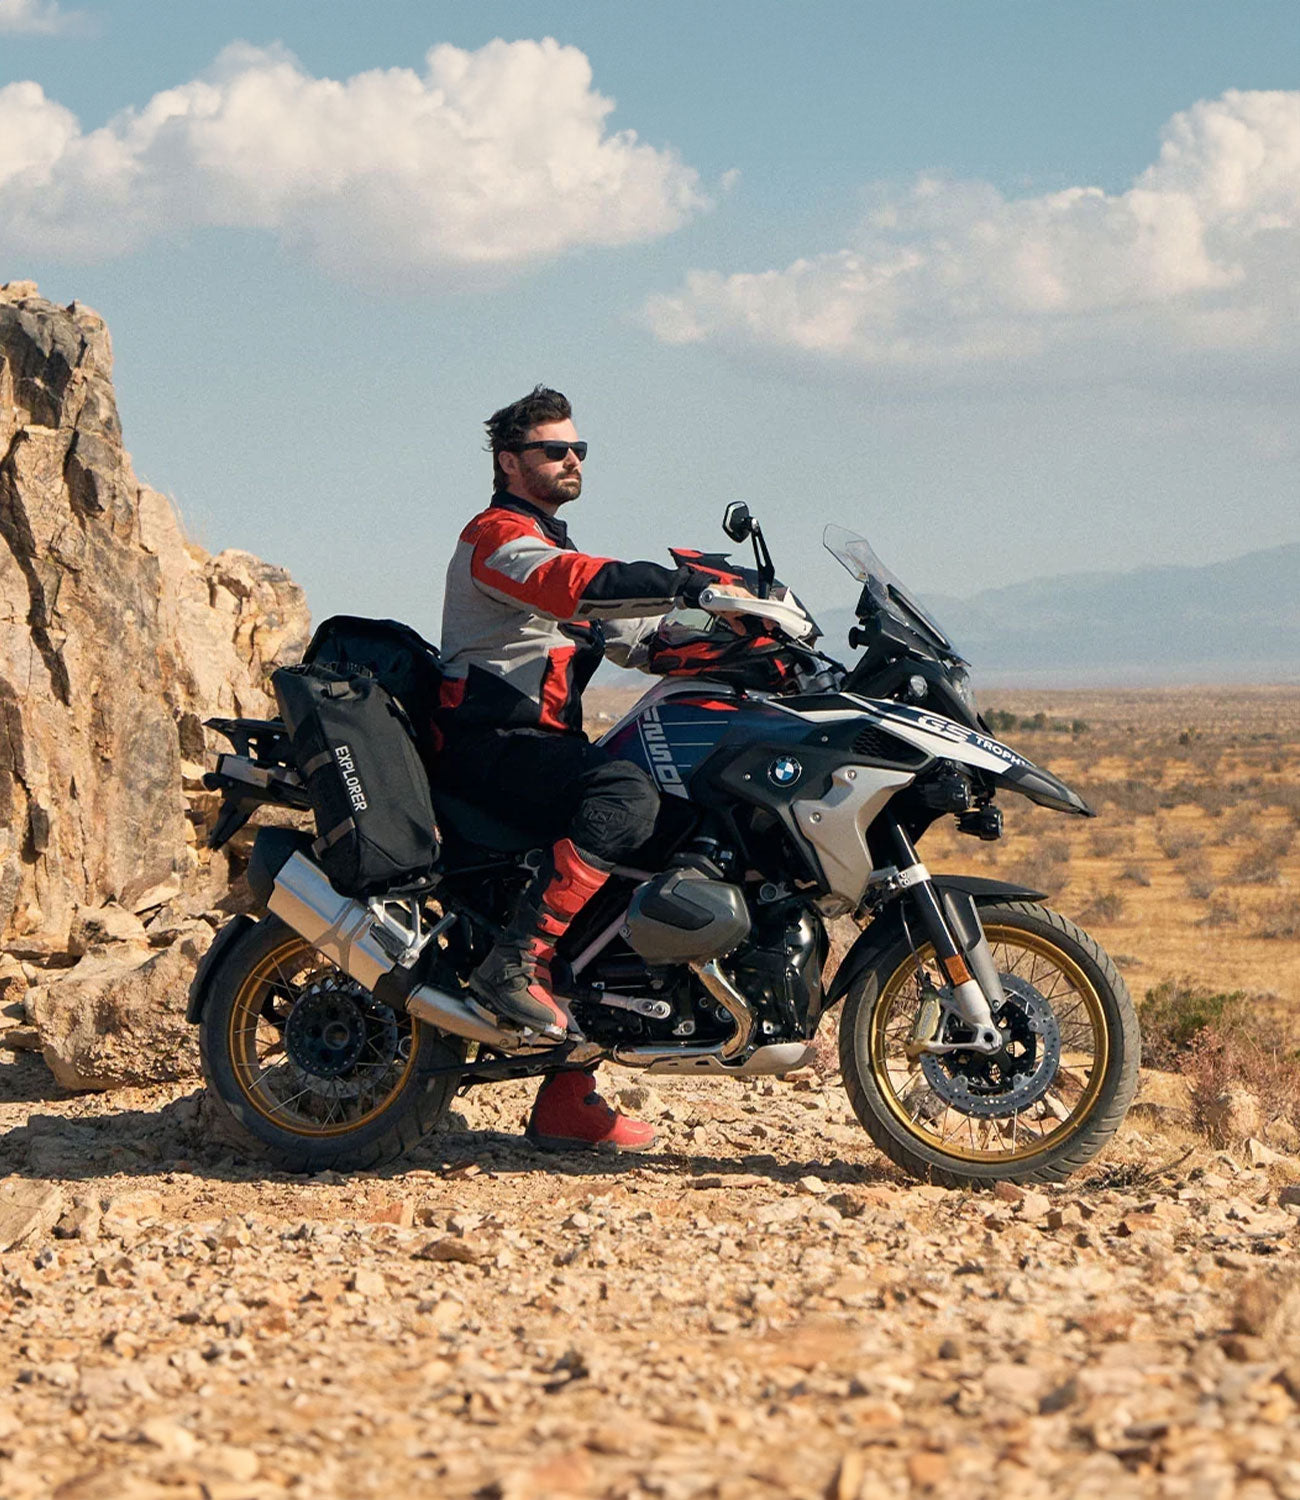 Ducati Adventure Touring Luggage System